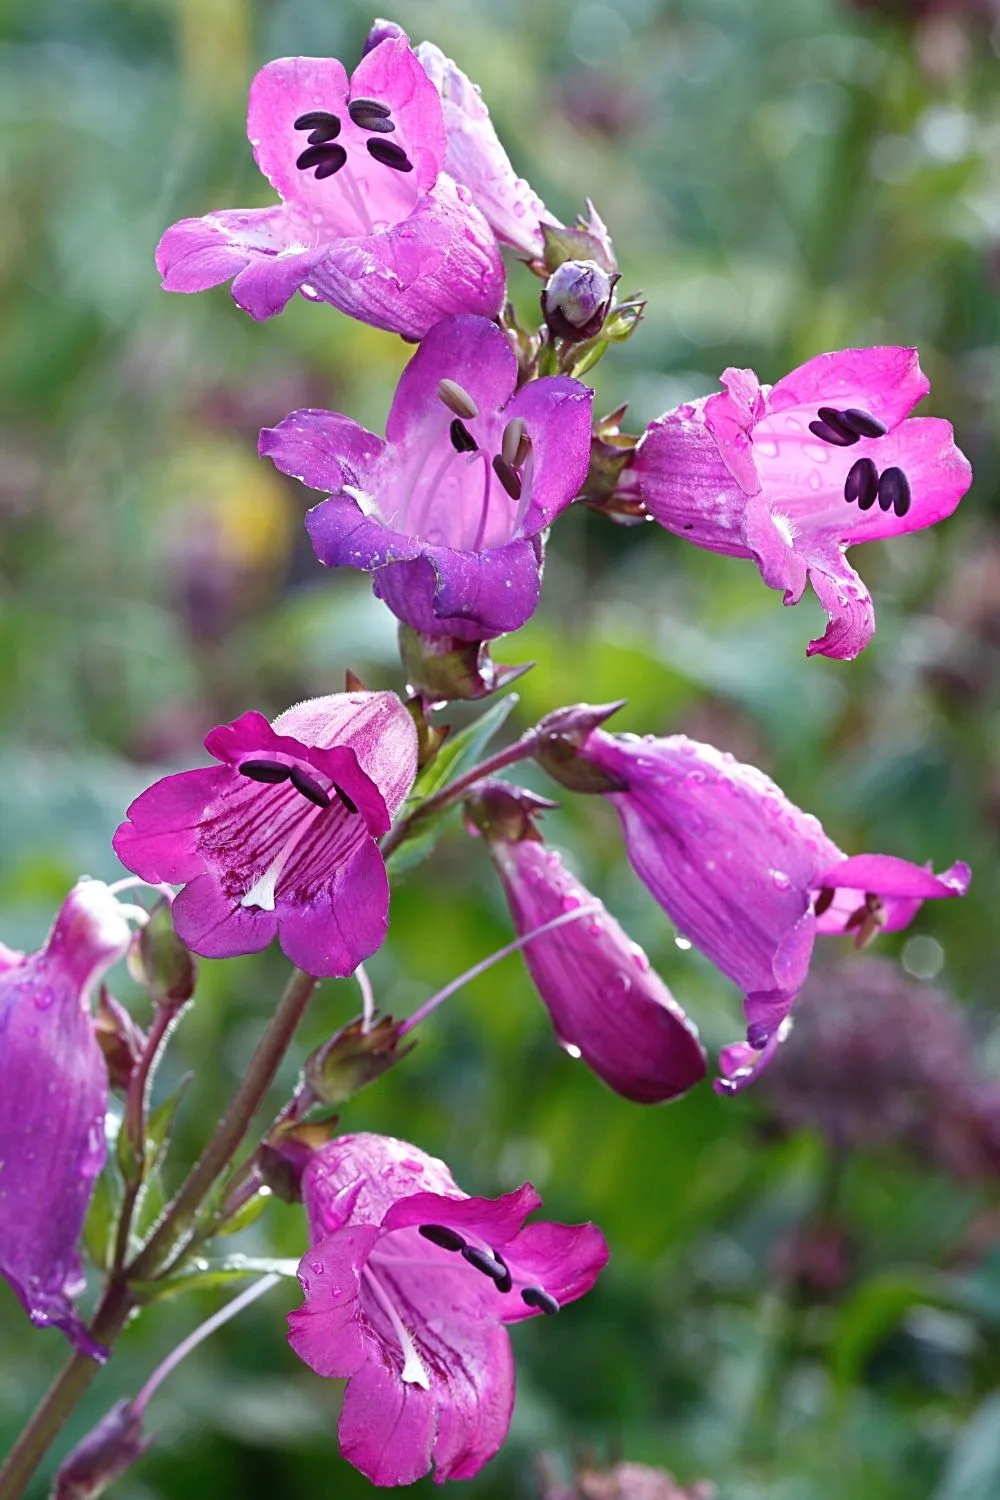 Penstemon is another great plant choice to grow in the west-facing side of the house